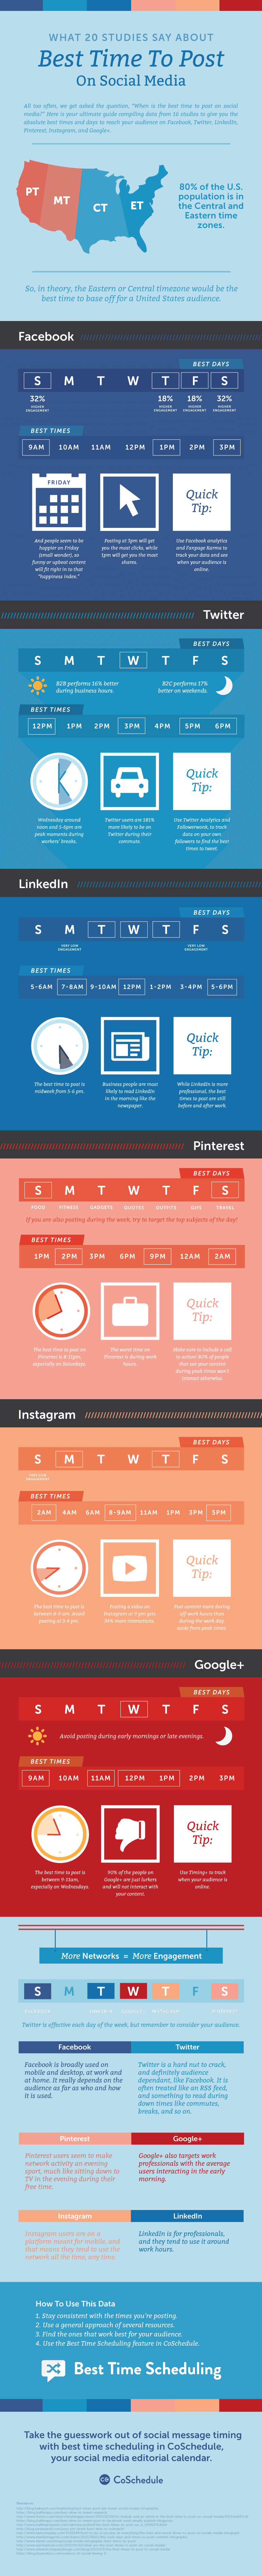 best hours to post on social media infographic